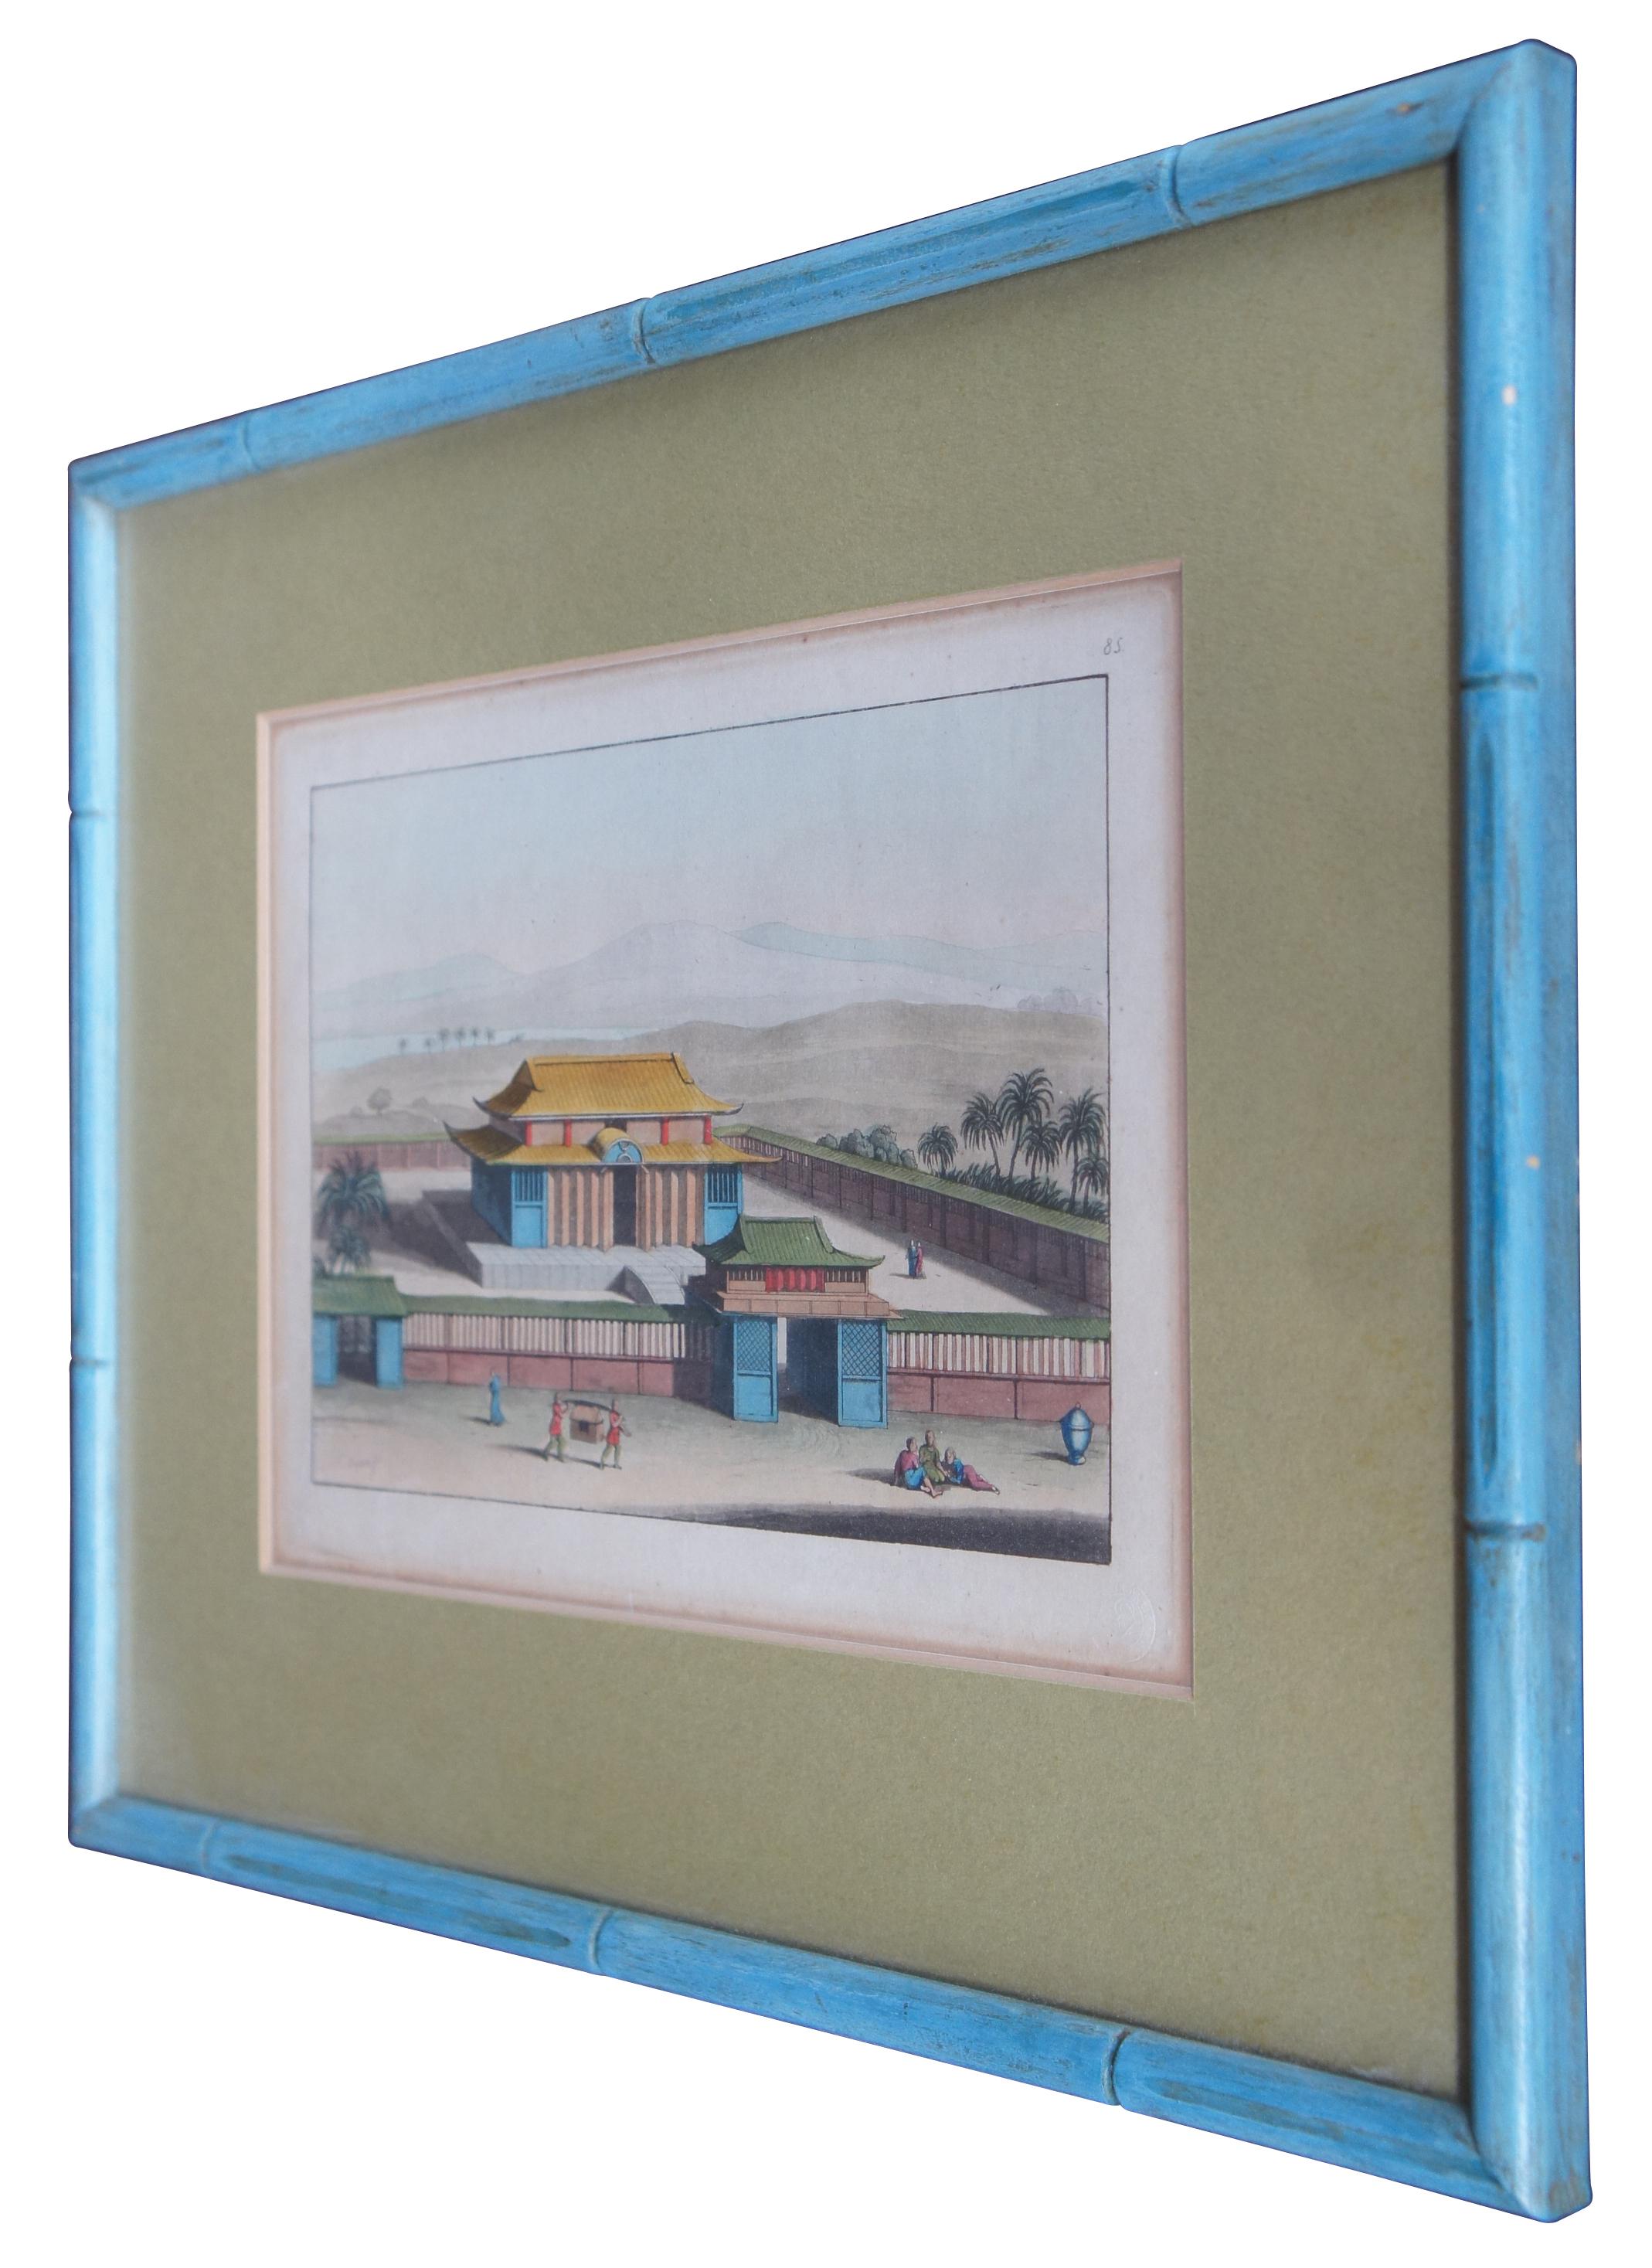 Vintage colored Pagoda Buddist temple engraving by S. Bigatti featuring a vibrant asian landscape scene dotted with palm trees, mountains and water. Plate no. 85. Framed in boho faux bamboo.

Measures: 13.75